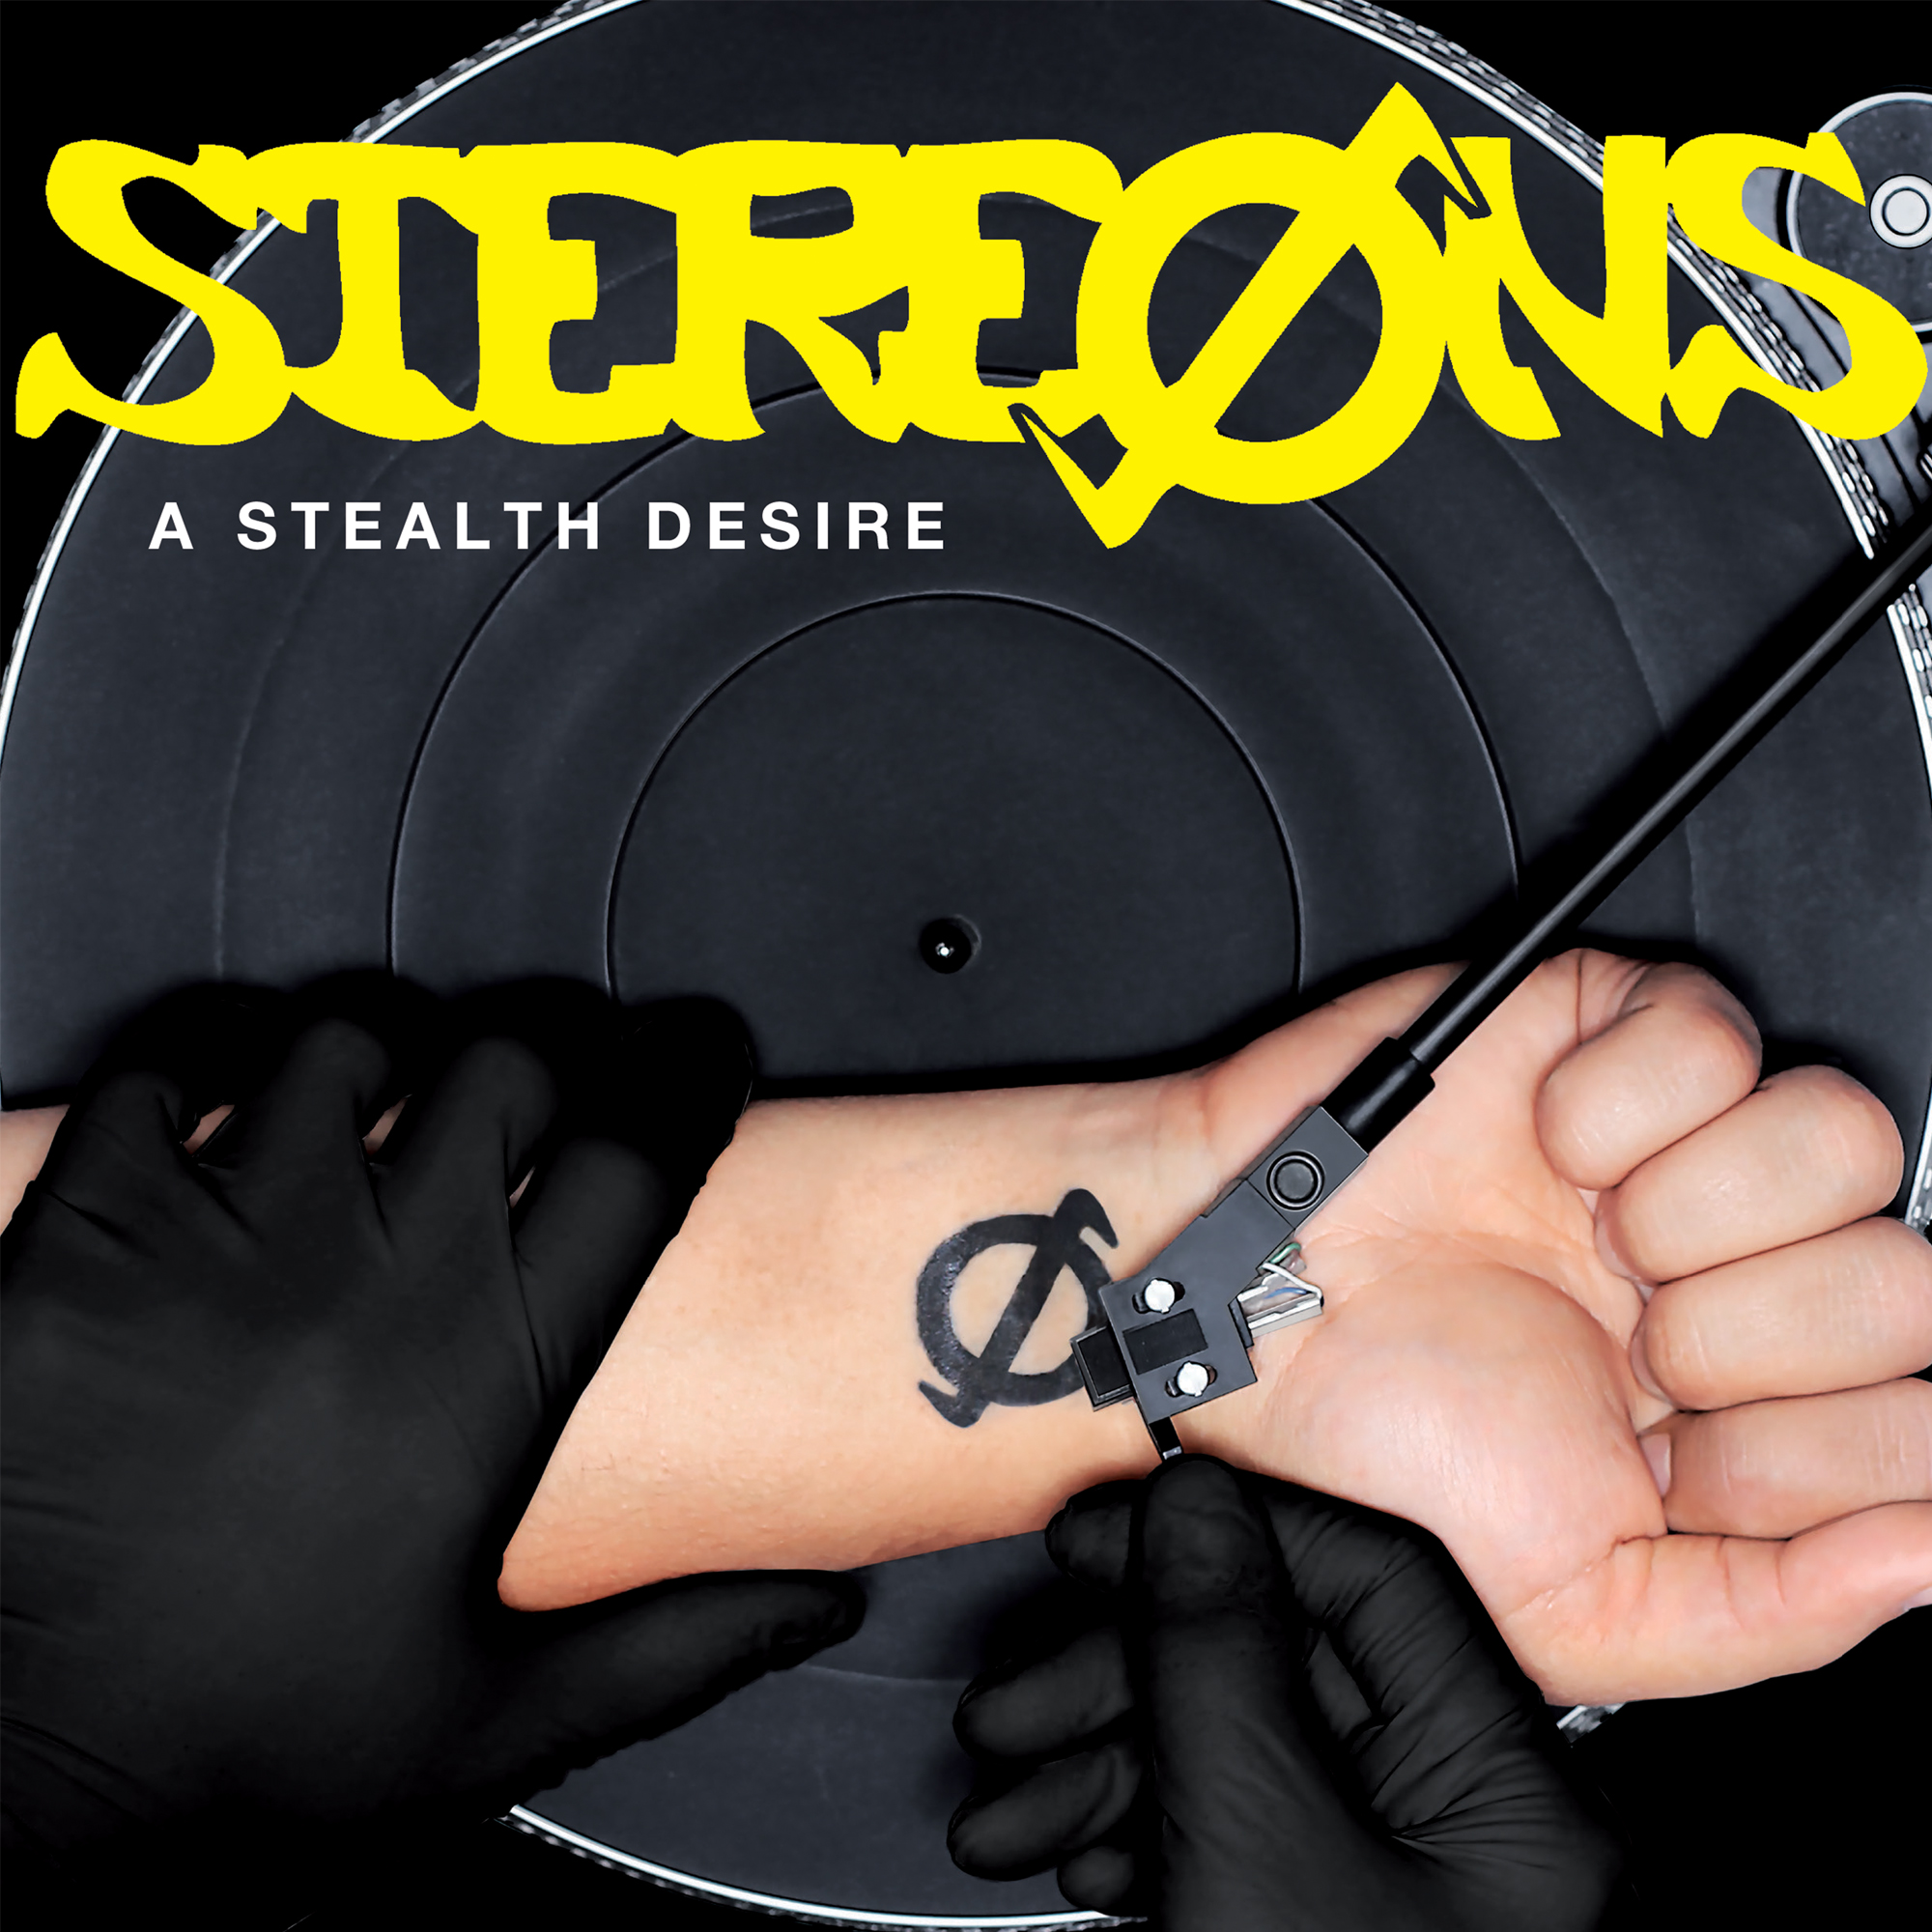 STEREONS_A STEALTH DESIRE_ALBUM COVER_2000x2000